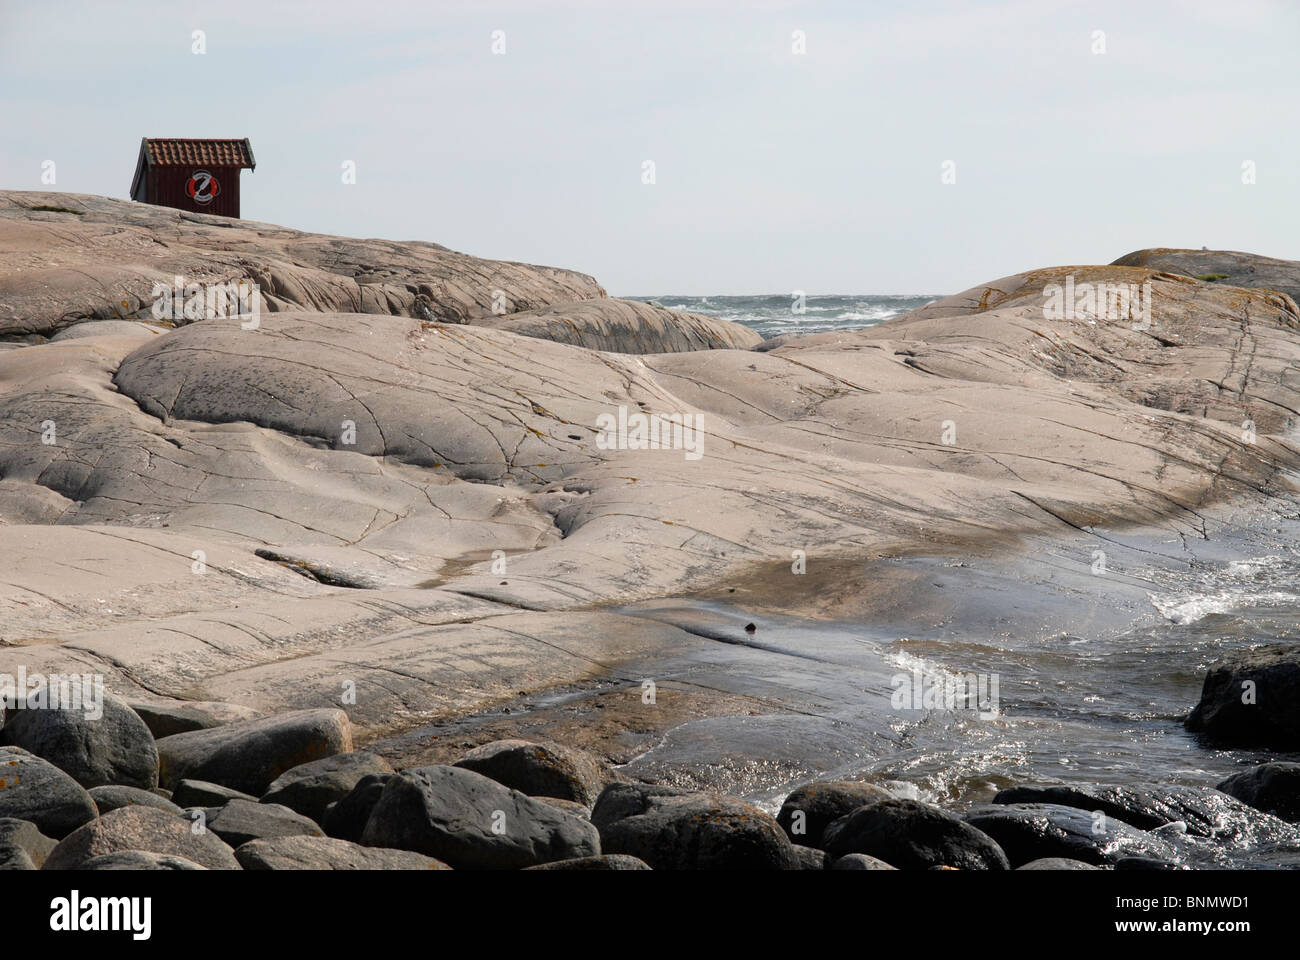 Rocks and a hut at the entrance of the harbour of Tjurpannan, Swedish West Coast Stock Photo